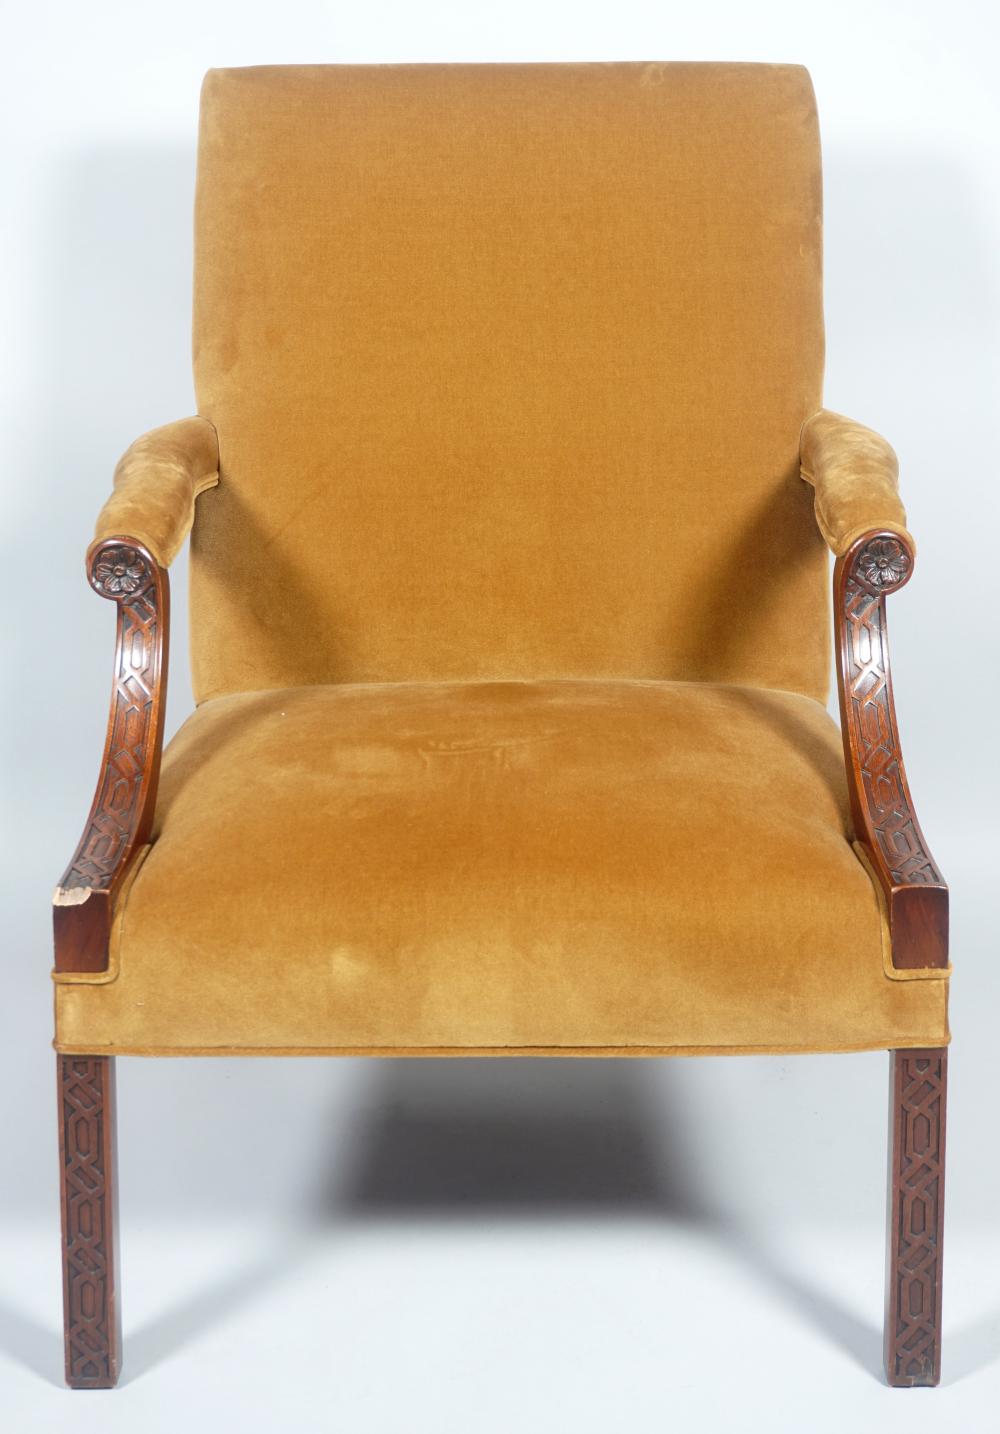 CHIPPENDALE STYLE UPHOLSTERED ARMCHAIR 33cede